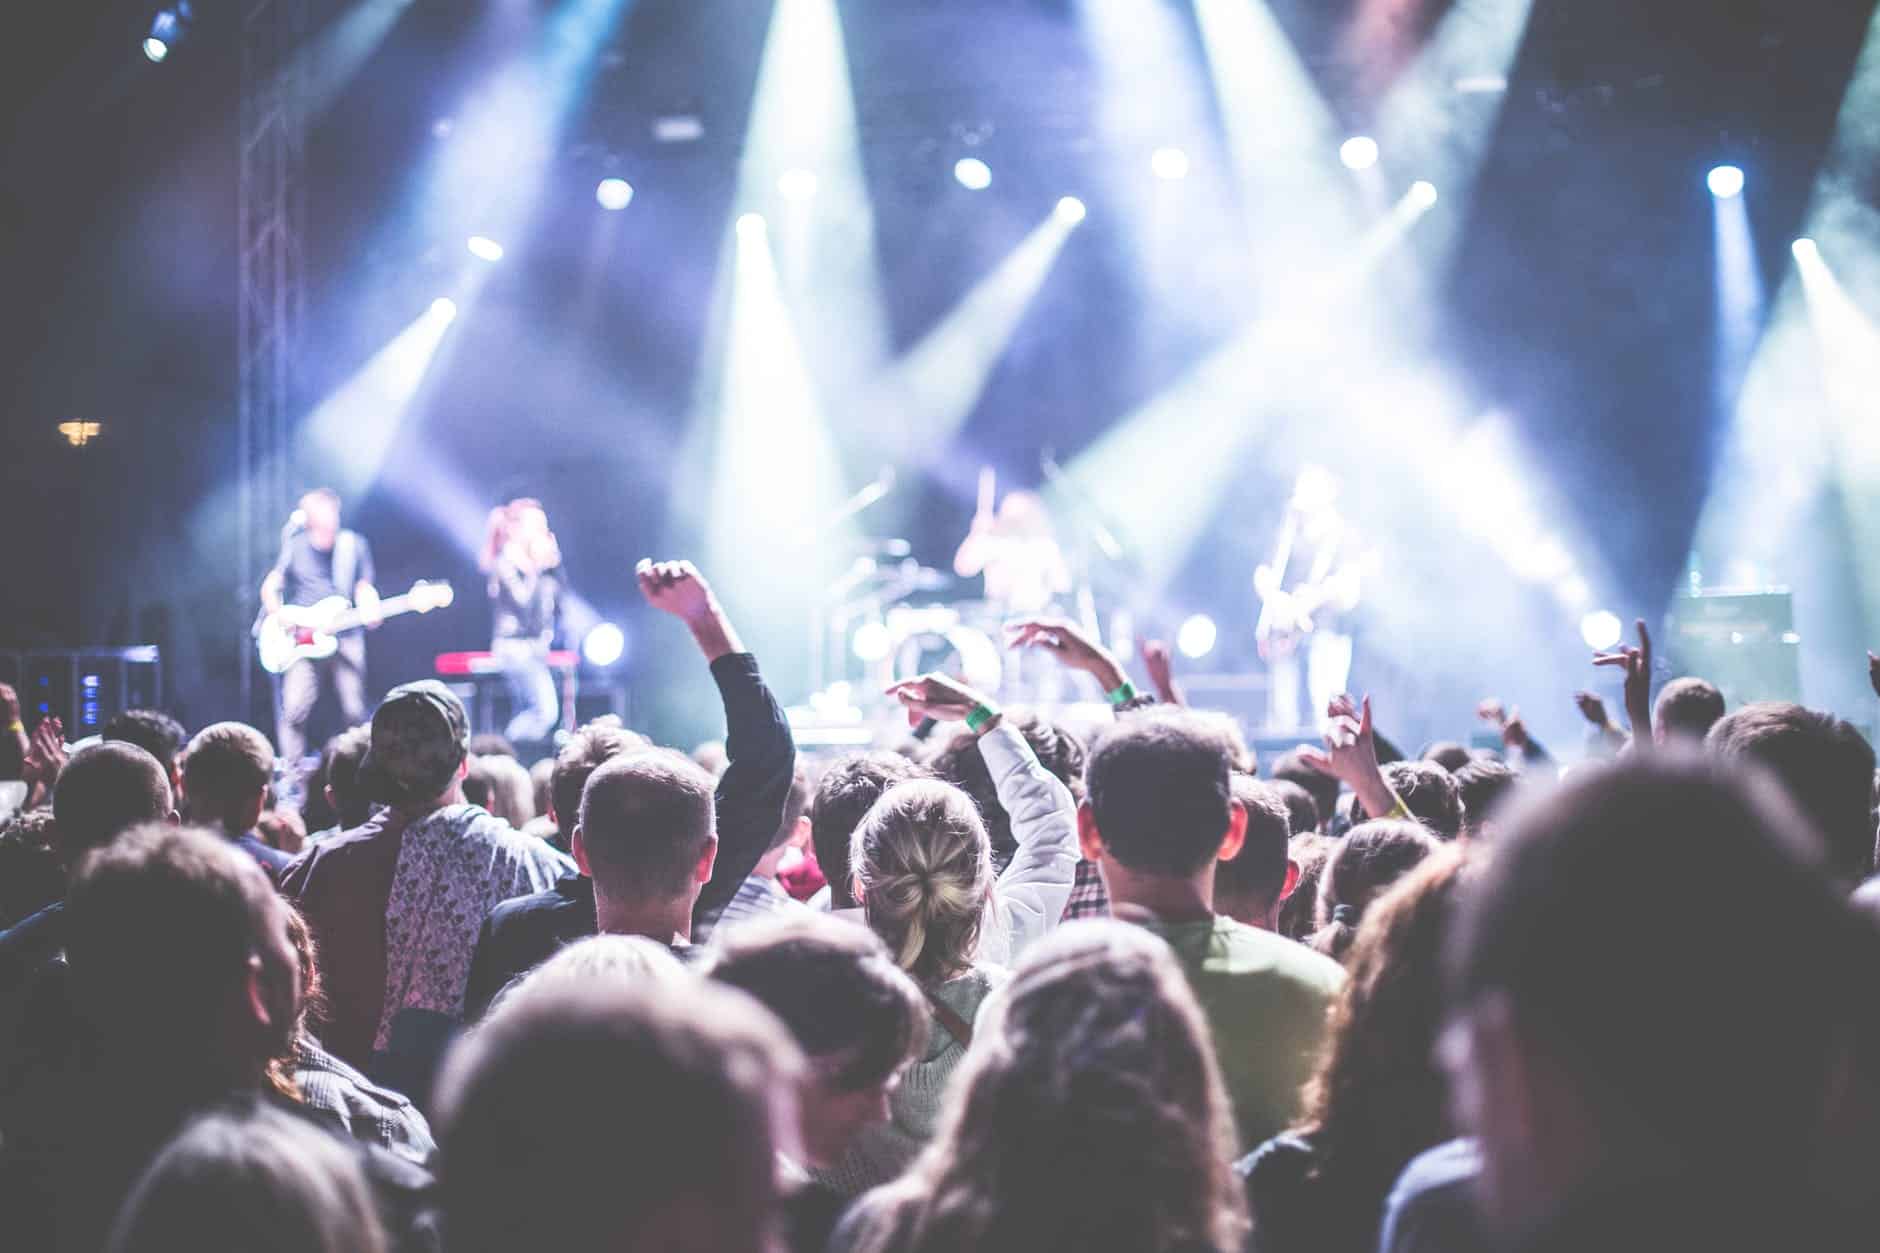 Concert tickets up to 77% more expensive in Switzerland